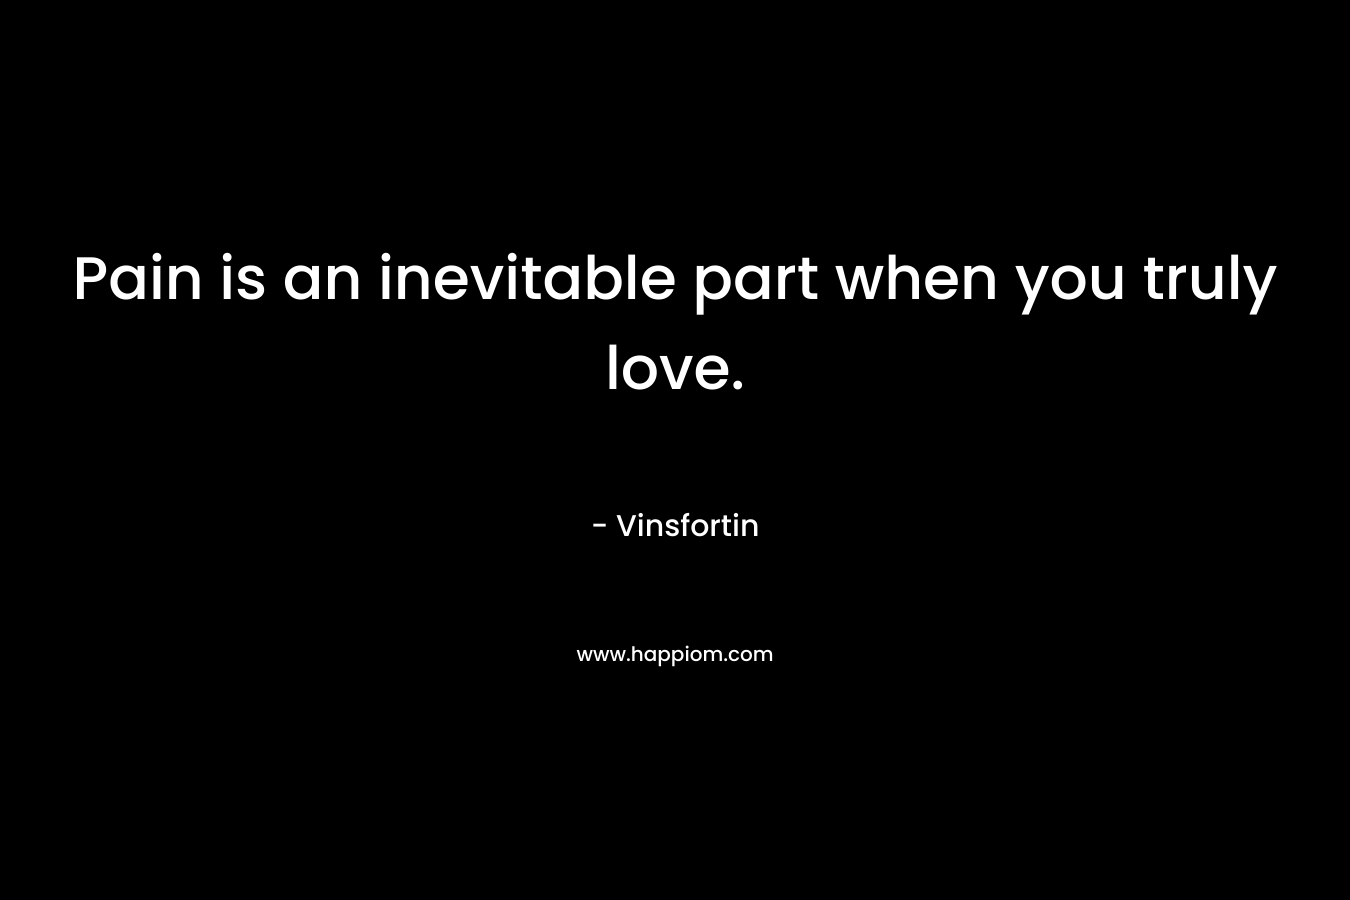 Pain is an inevitable part when you truly love. – Vinsfortin